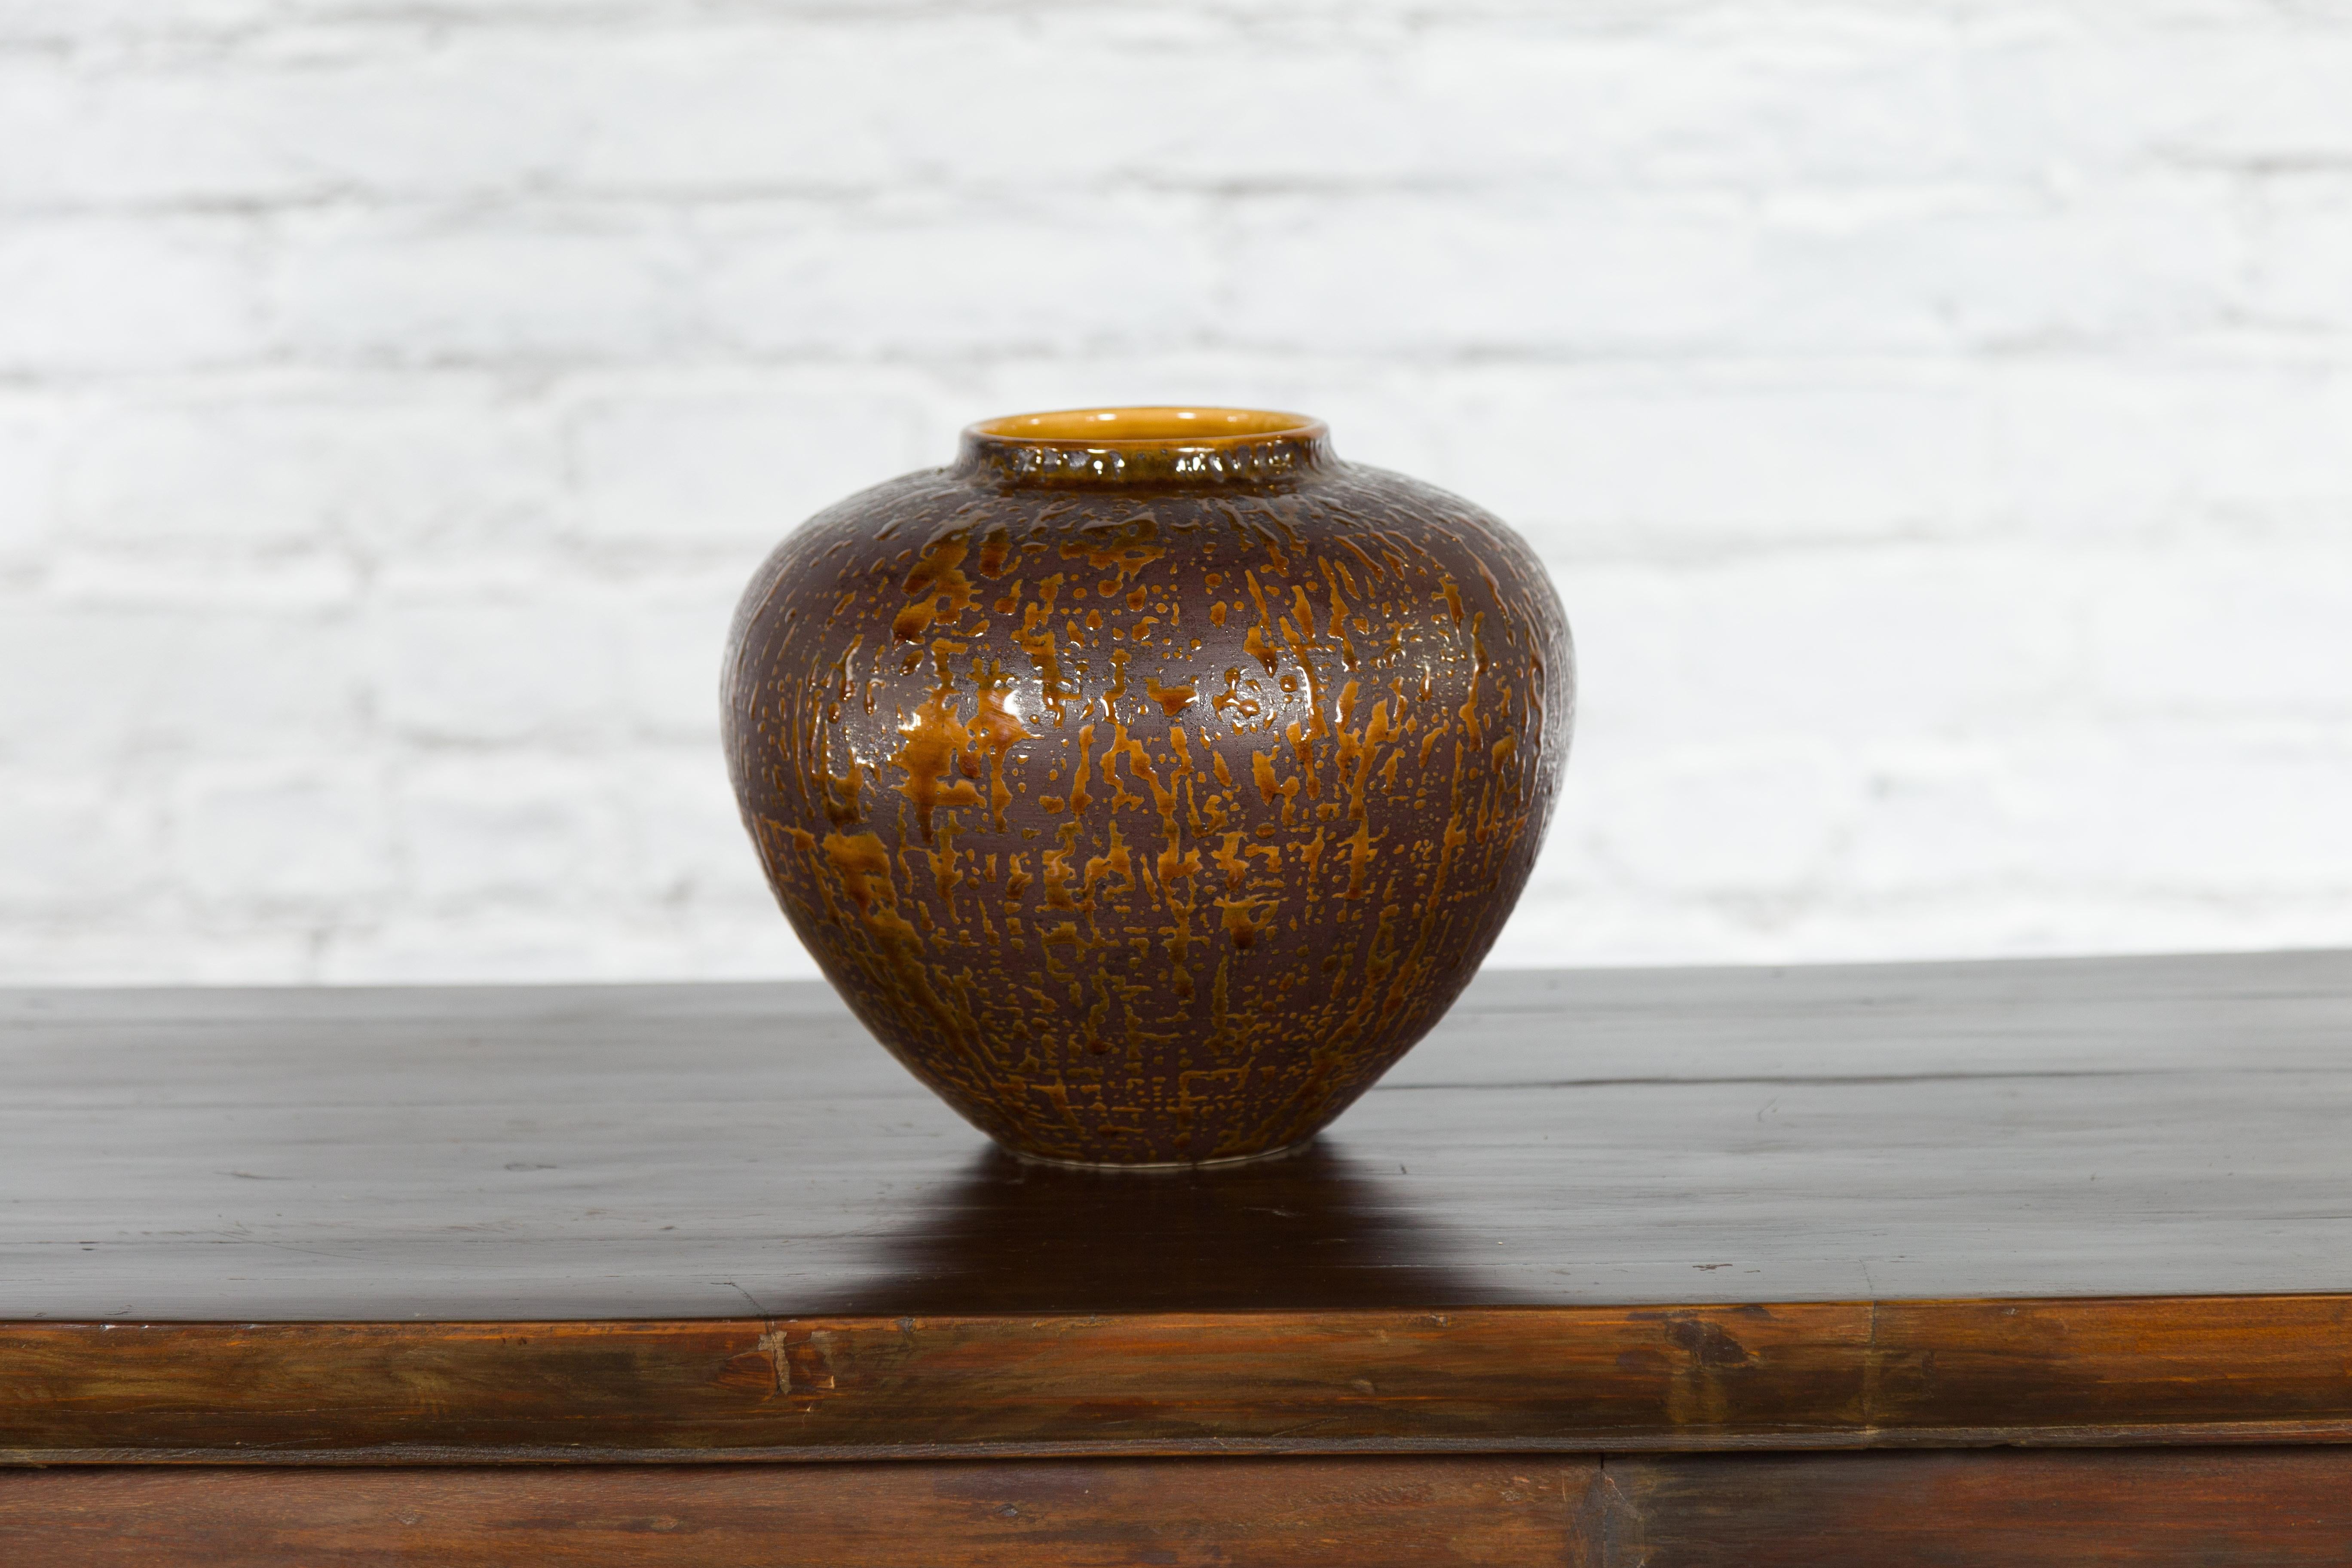 A large vintage Artisan ceramic jar from the Prem Collection, with dark brown glaze and caramel colored dripping. Hand-crafted during the last quarter of the 20th century, this artisan Prem Collection ceramic jar attracts our attention with its